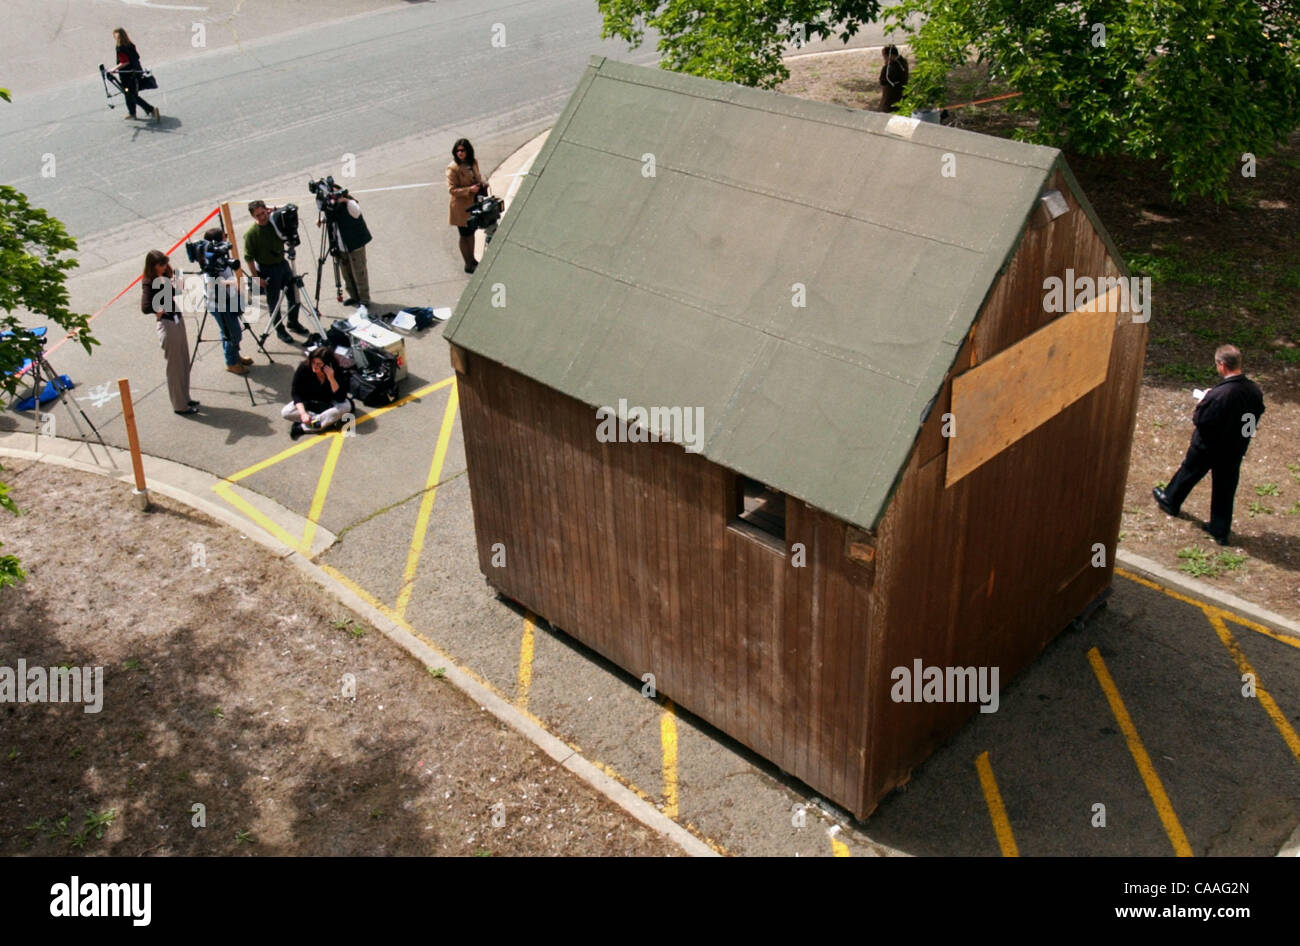 May 01, 2003; Sacramento, CA, USA; The 10' x 13' wooden cabin that Ted Kaczynski, the convicted Unabomber, lived in in Montana has been transfered to private ownership today, Thursday, May 1, 2003.  The structure was supposed to be dismantled and removed from a storage facility at Mather Regional Pa Stock Photo